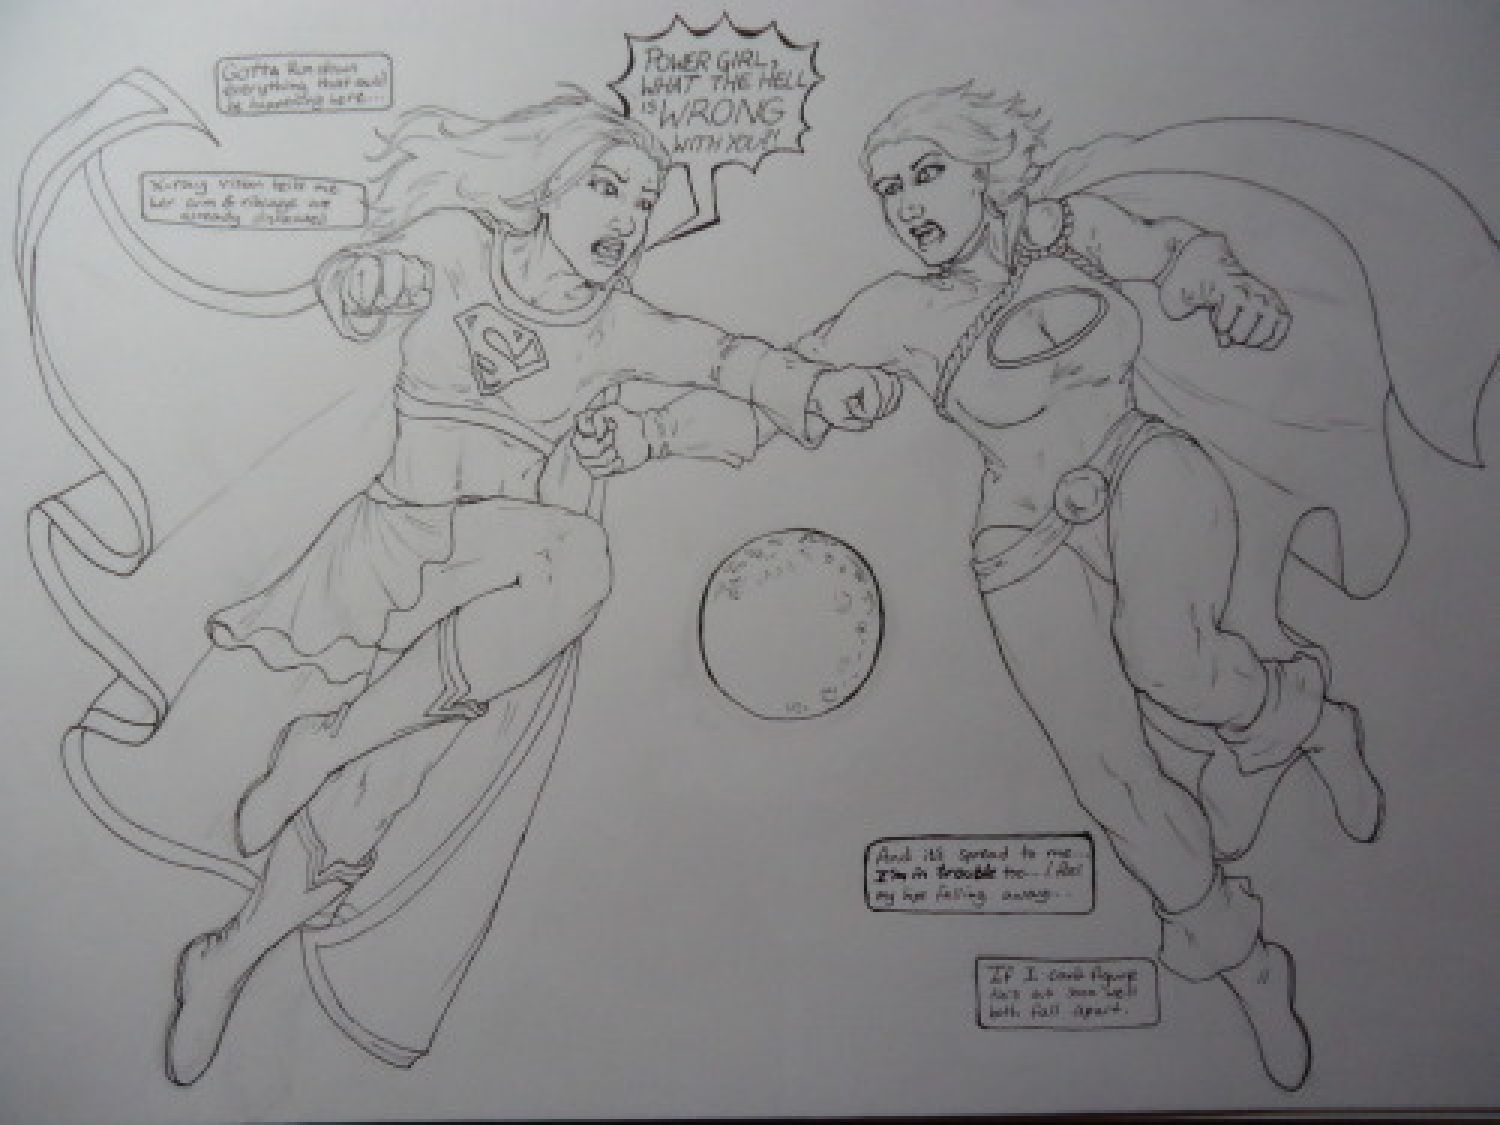 pencil sketch of the supergirl powergirl fight redraw by TheDreadVampy on Tumblr depicting the finished redraw of Supergirl and Powergirl flying at each other and punching, their clothes are roughly the same as in the original but their proportions are more realistic and less stick figures and their poses make a little more sense